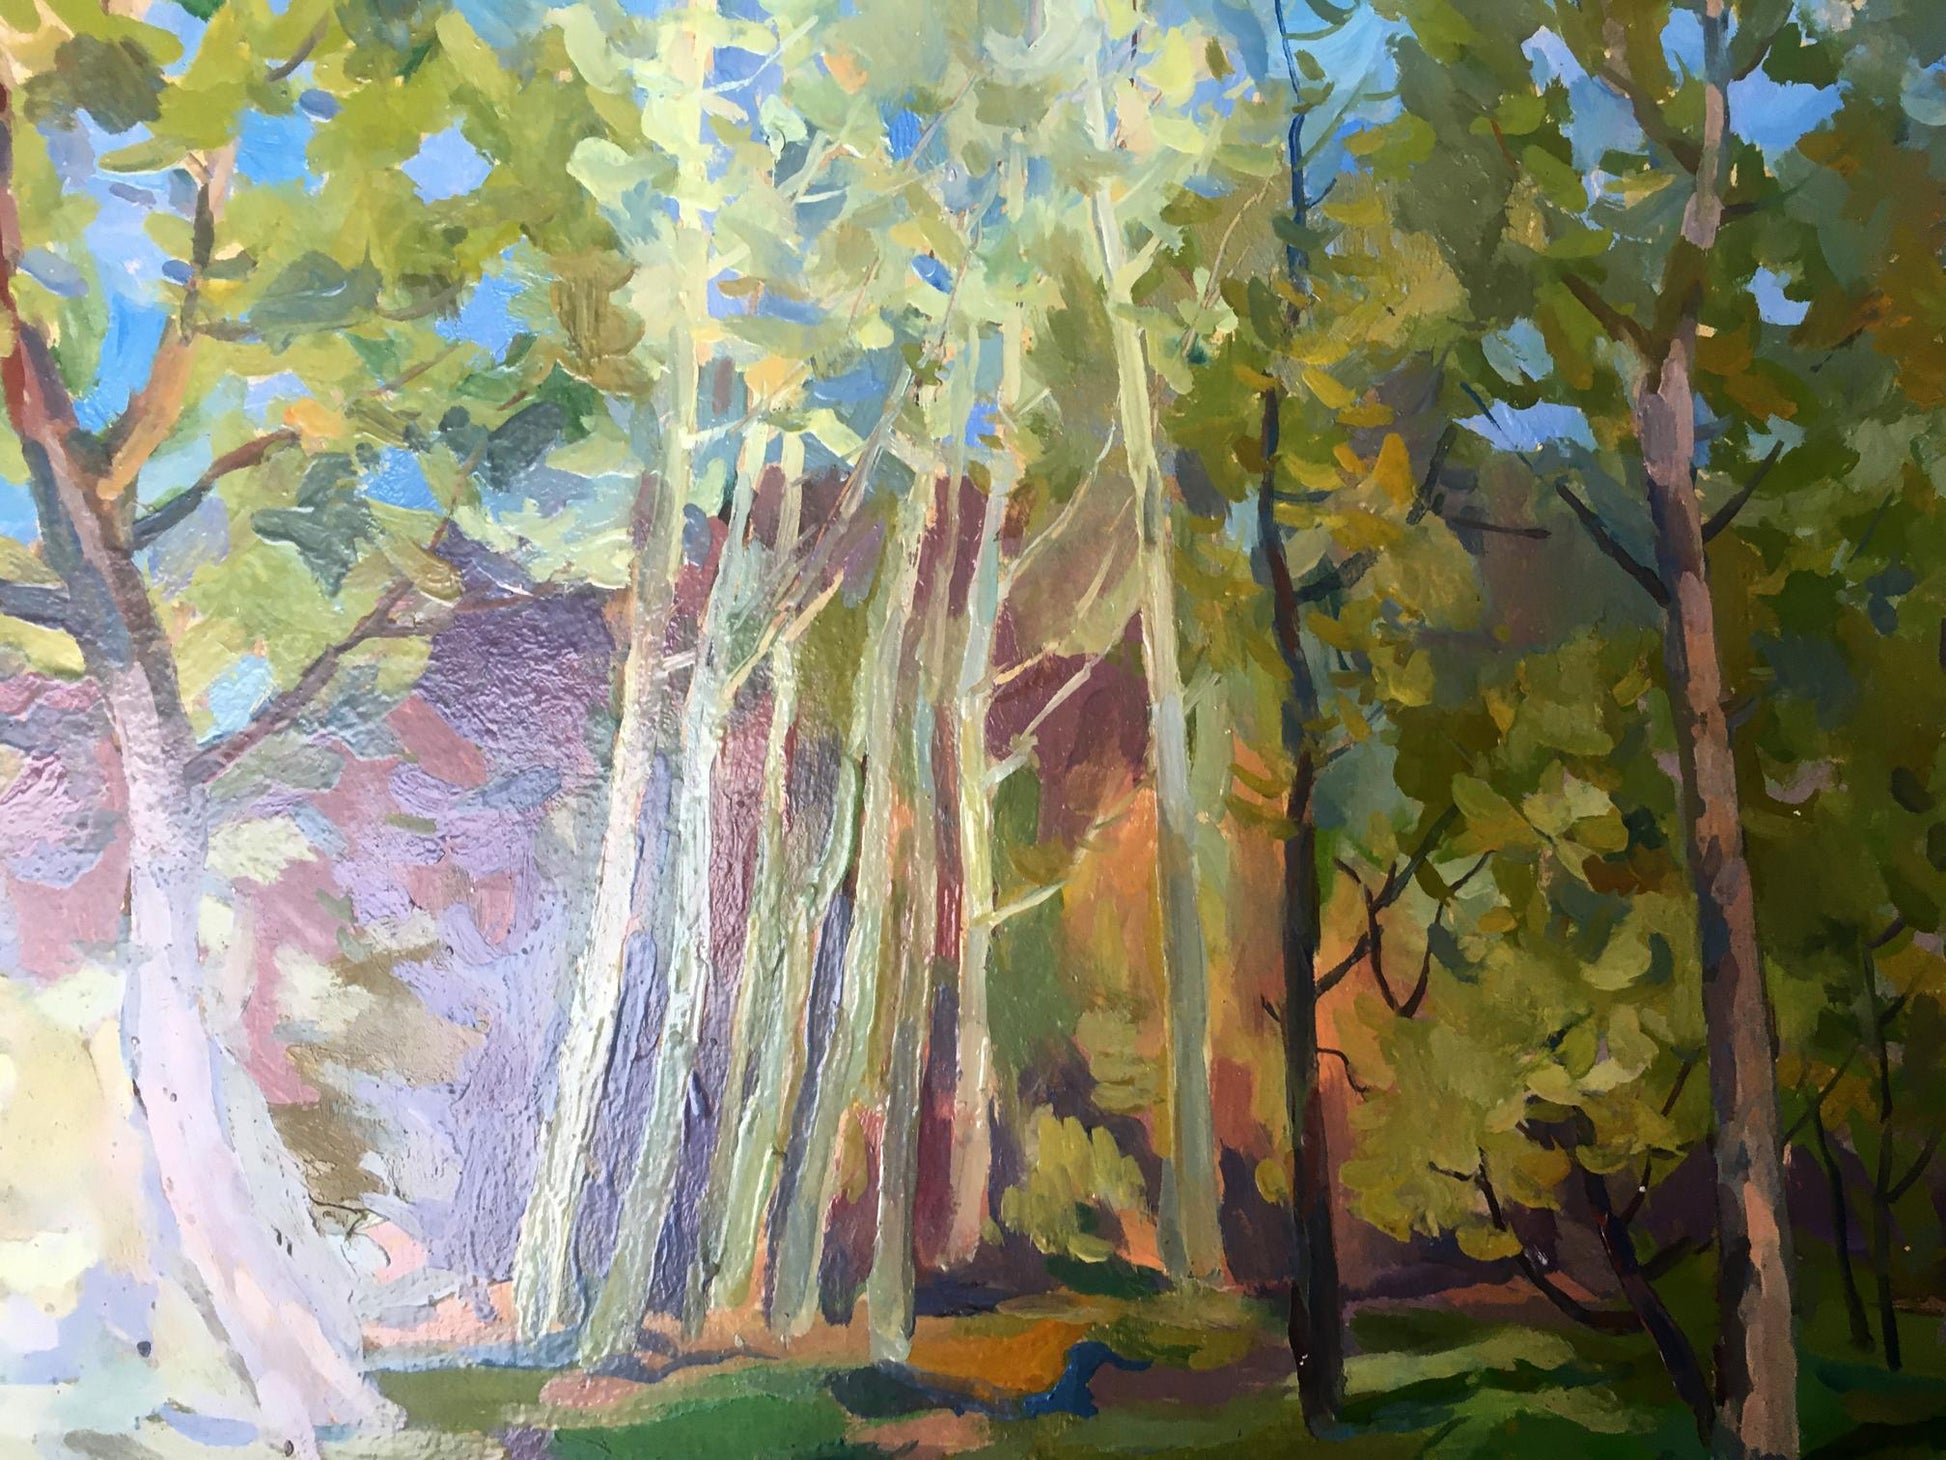 The forest walk depicted in Peter Dobrev's oil painting